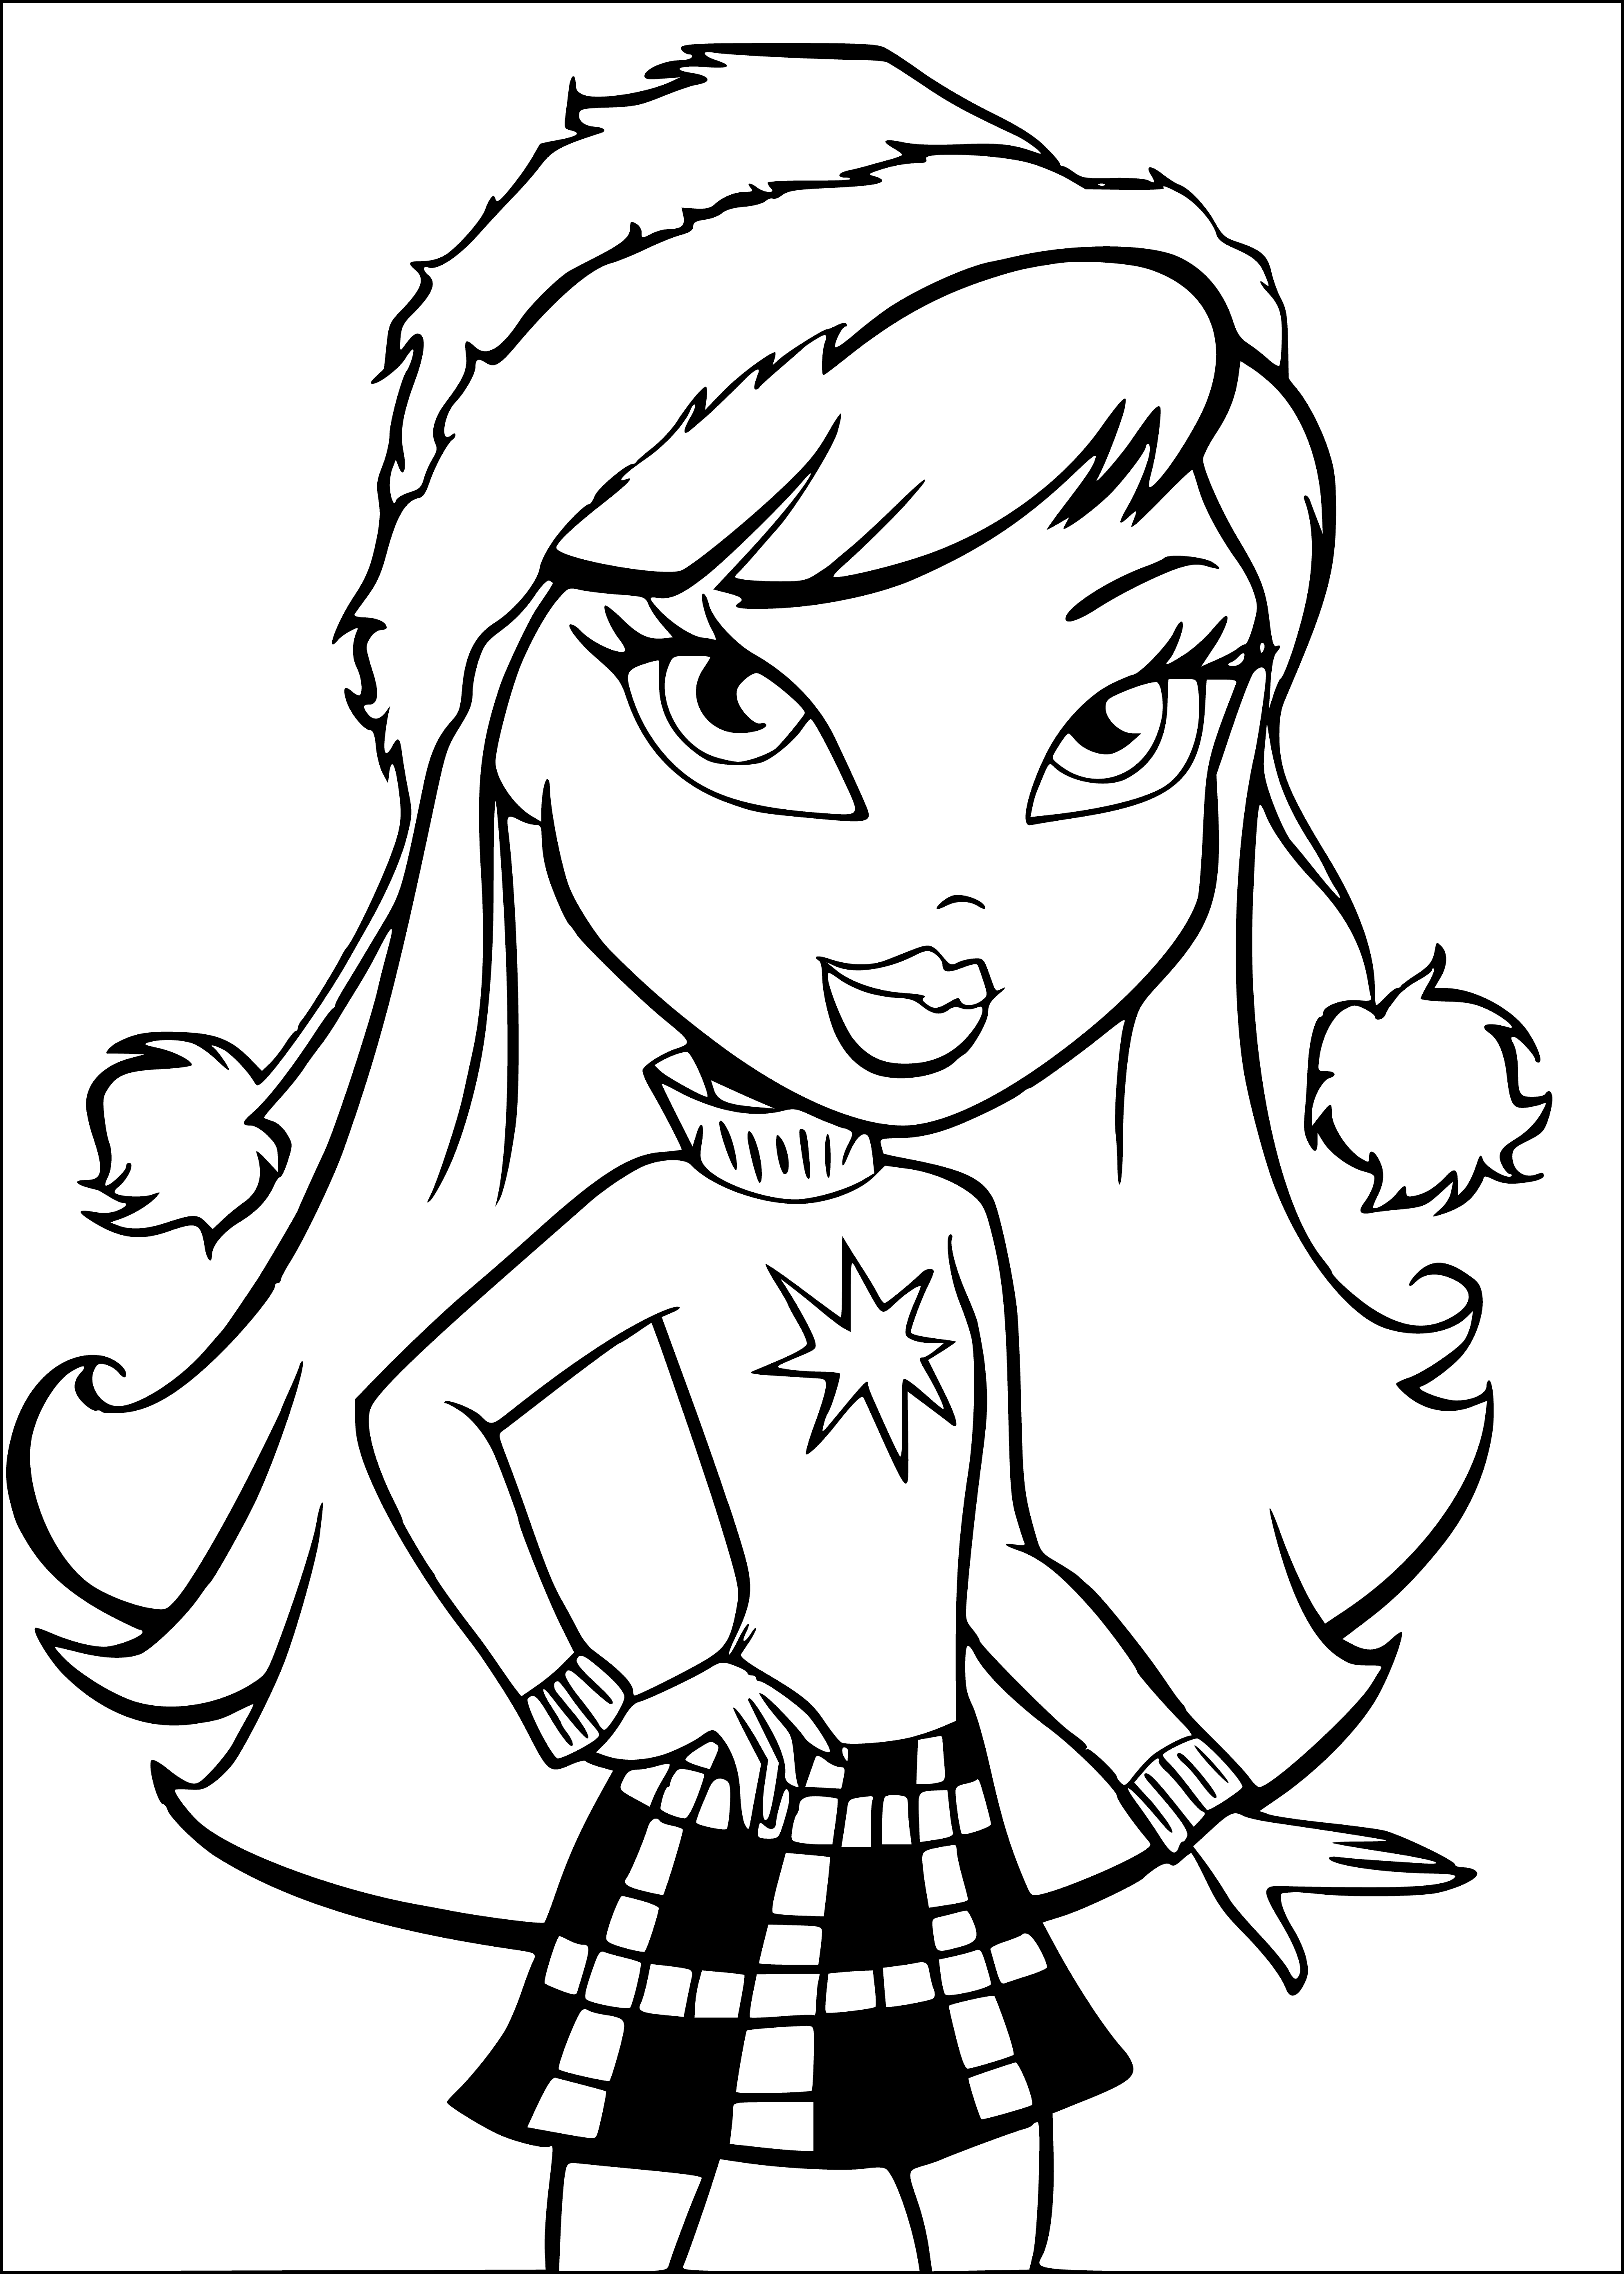 Doll in a hat coloring page